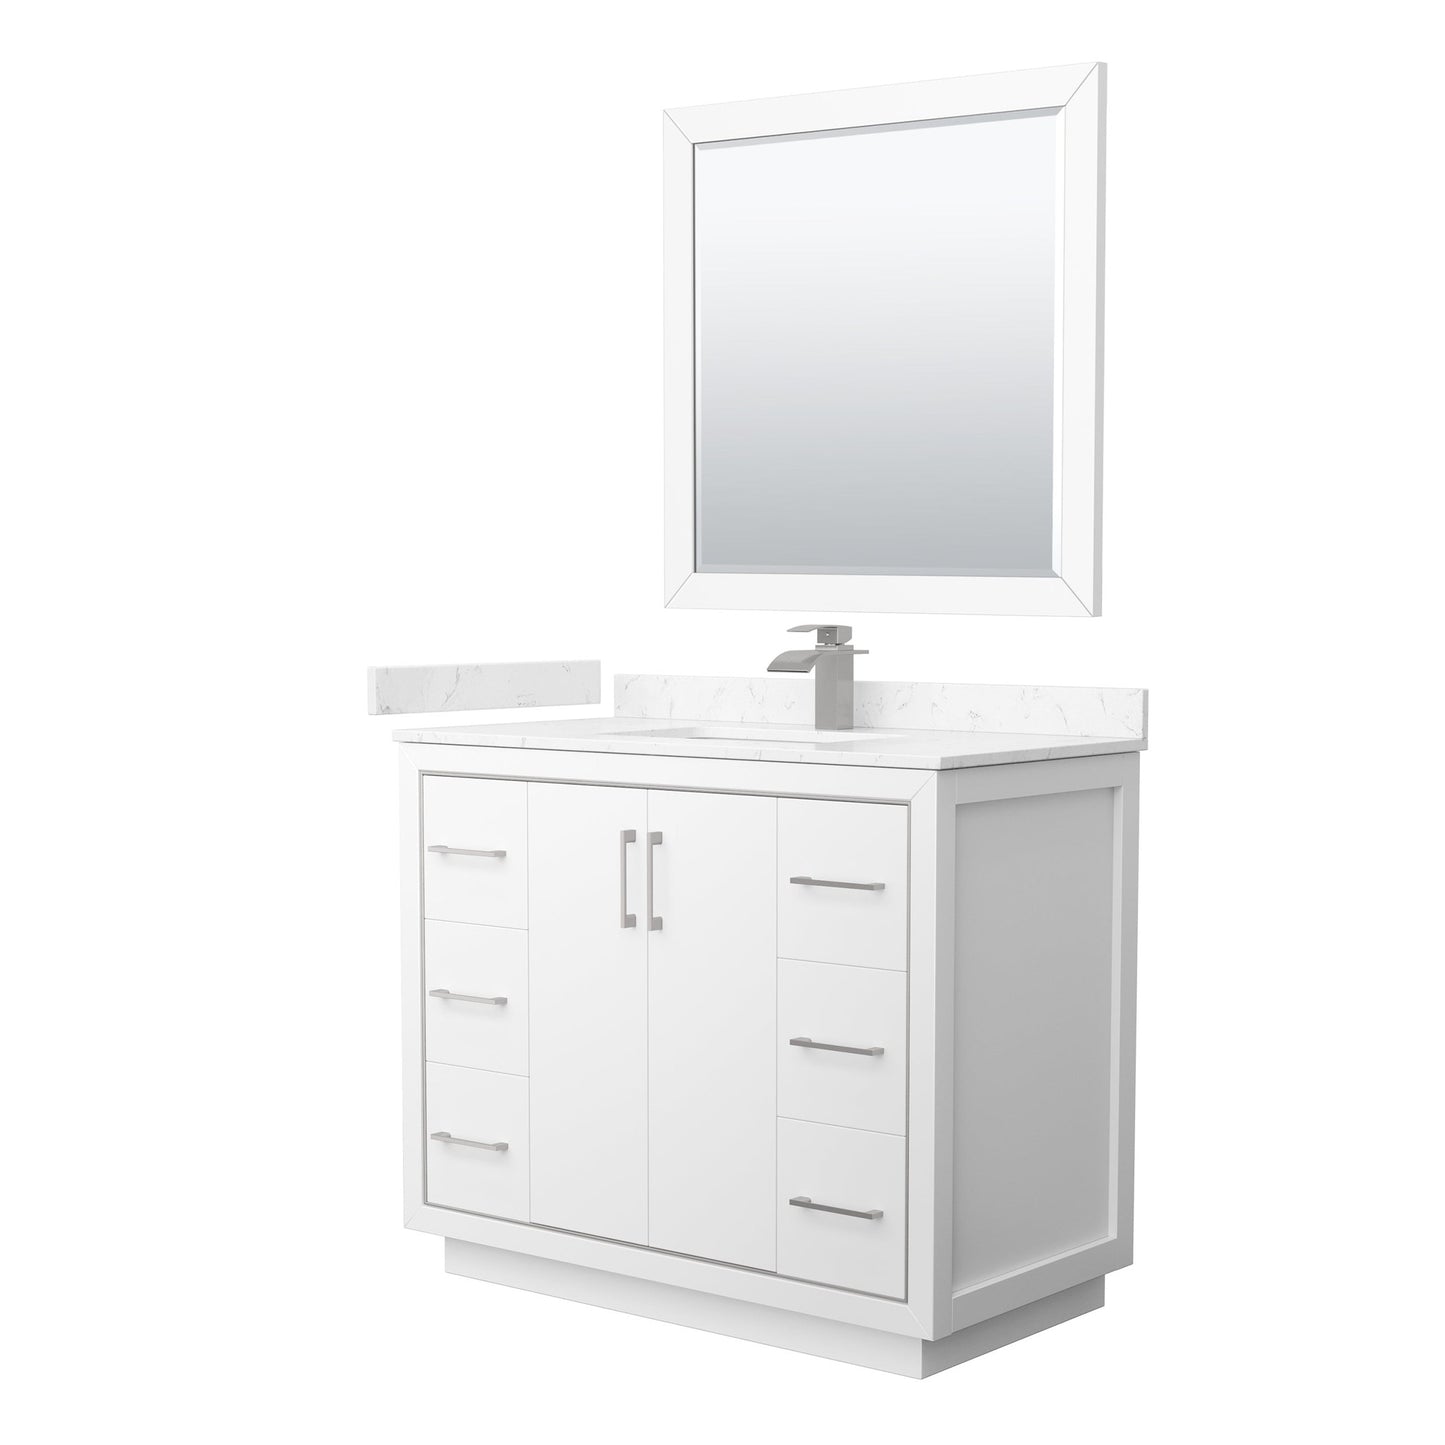 Wyndham Collection Icon 42" Single Bathroom Vanity in White, Carrara Cultured Marble Countertop, Undermount Square Sink, Brushed Nickel Trim, 34" Mirror